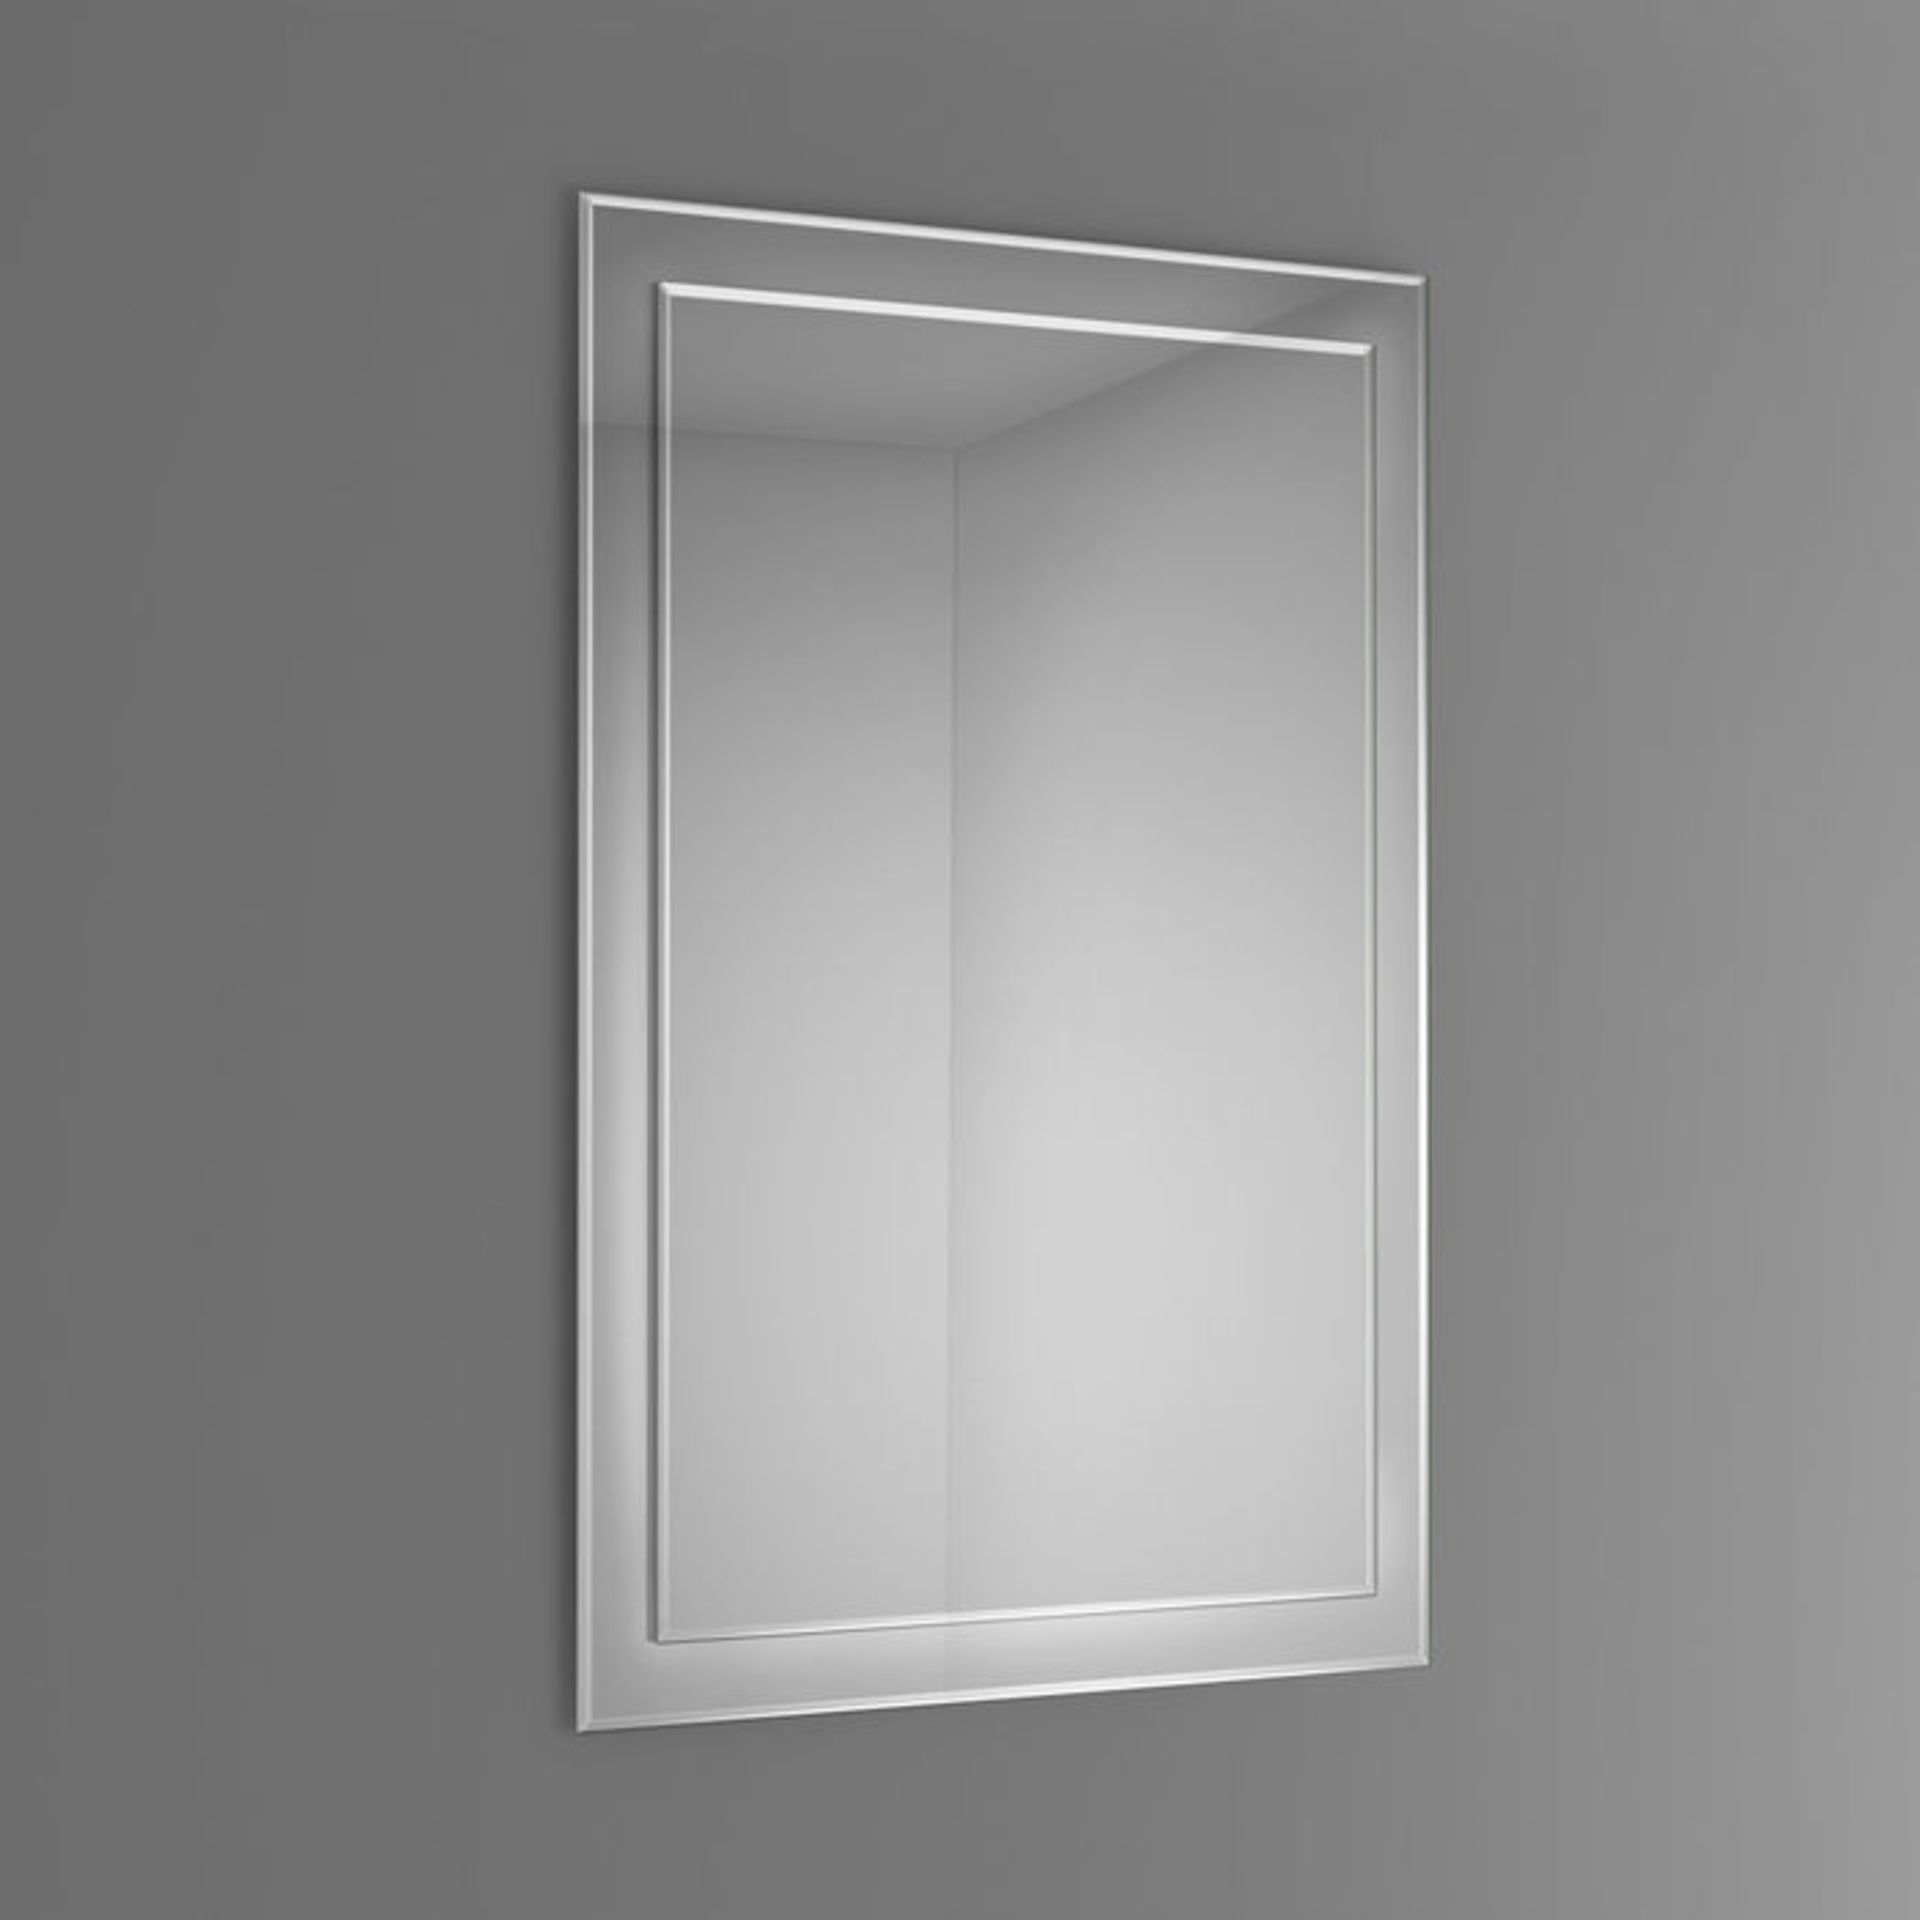 (W127) 500x700mm Bevel Mirror. Smooth beveled edge for additional safety and style Supplied fully - Image 3 of 3